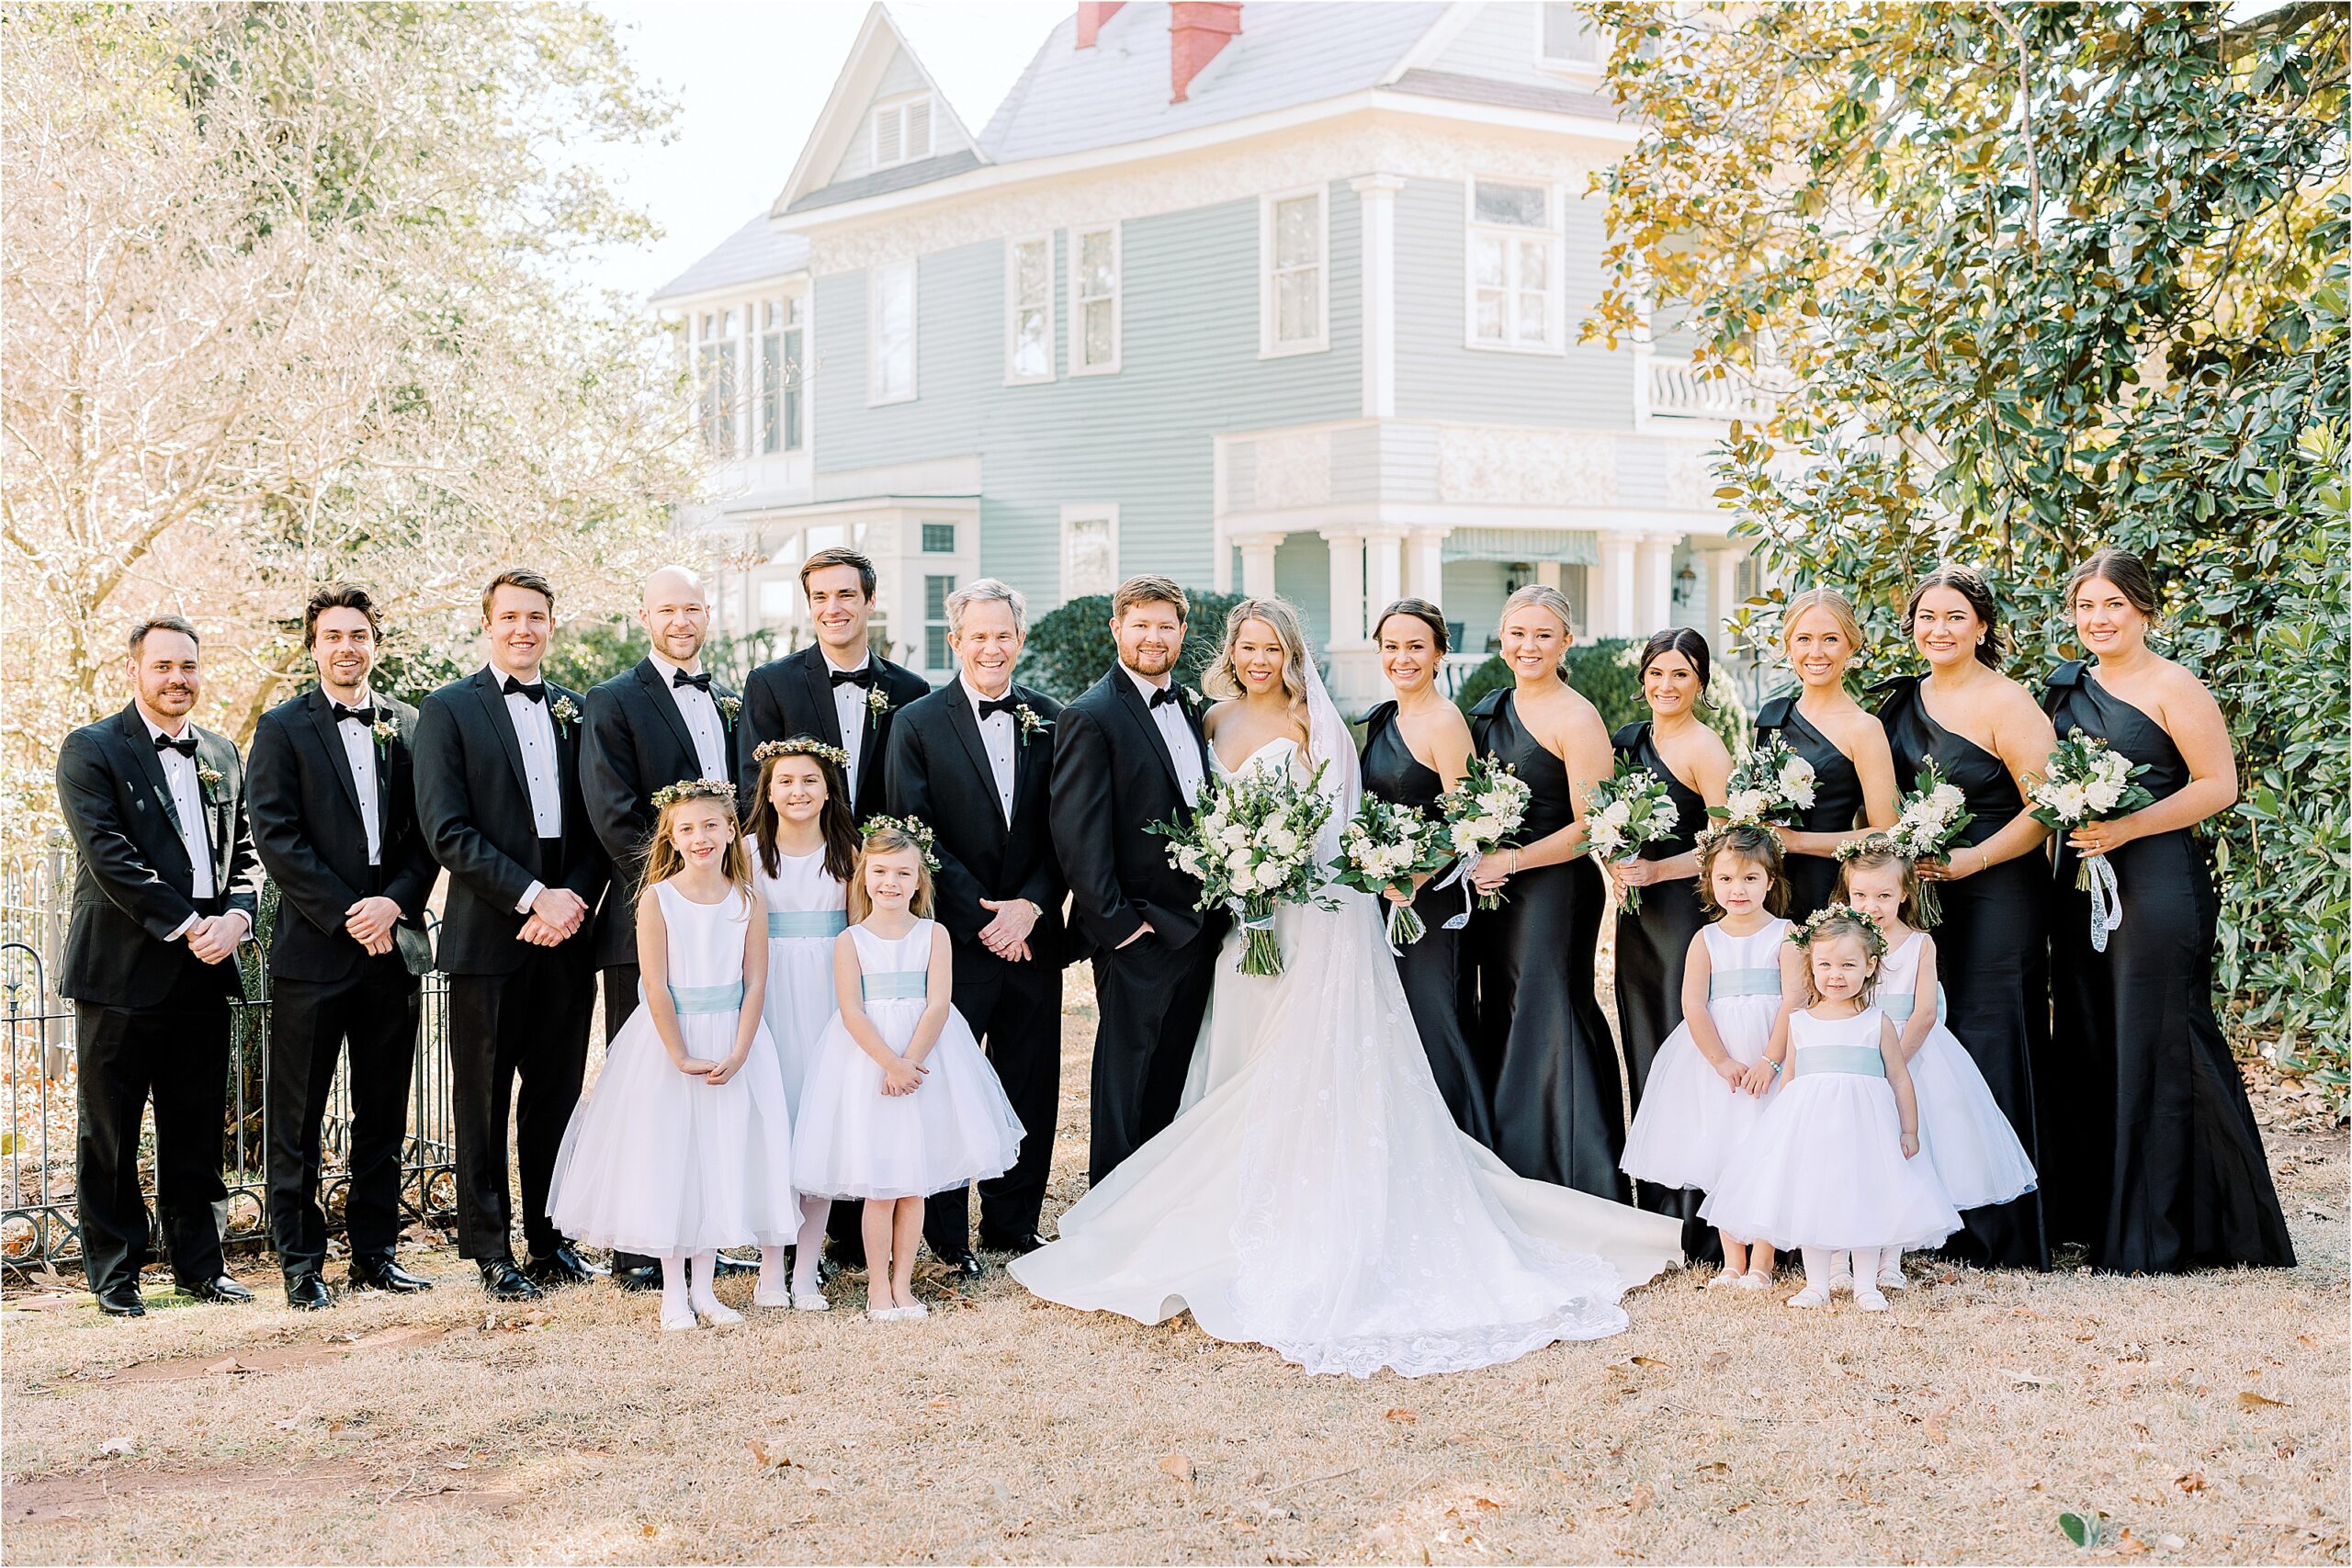 Bridal party in all black standing in front of a blue house sounded by trees. 